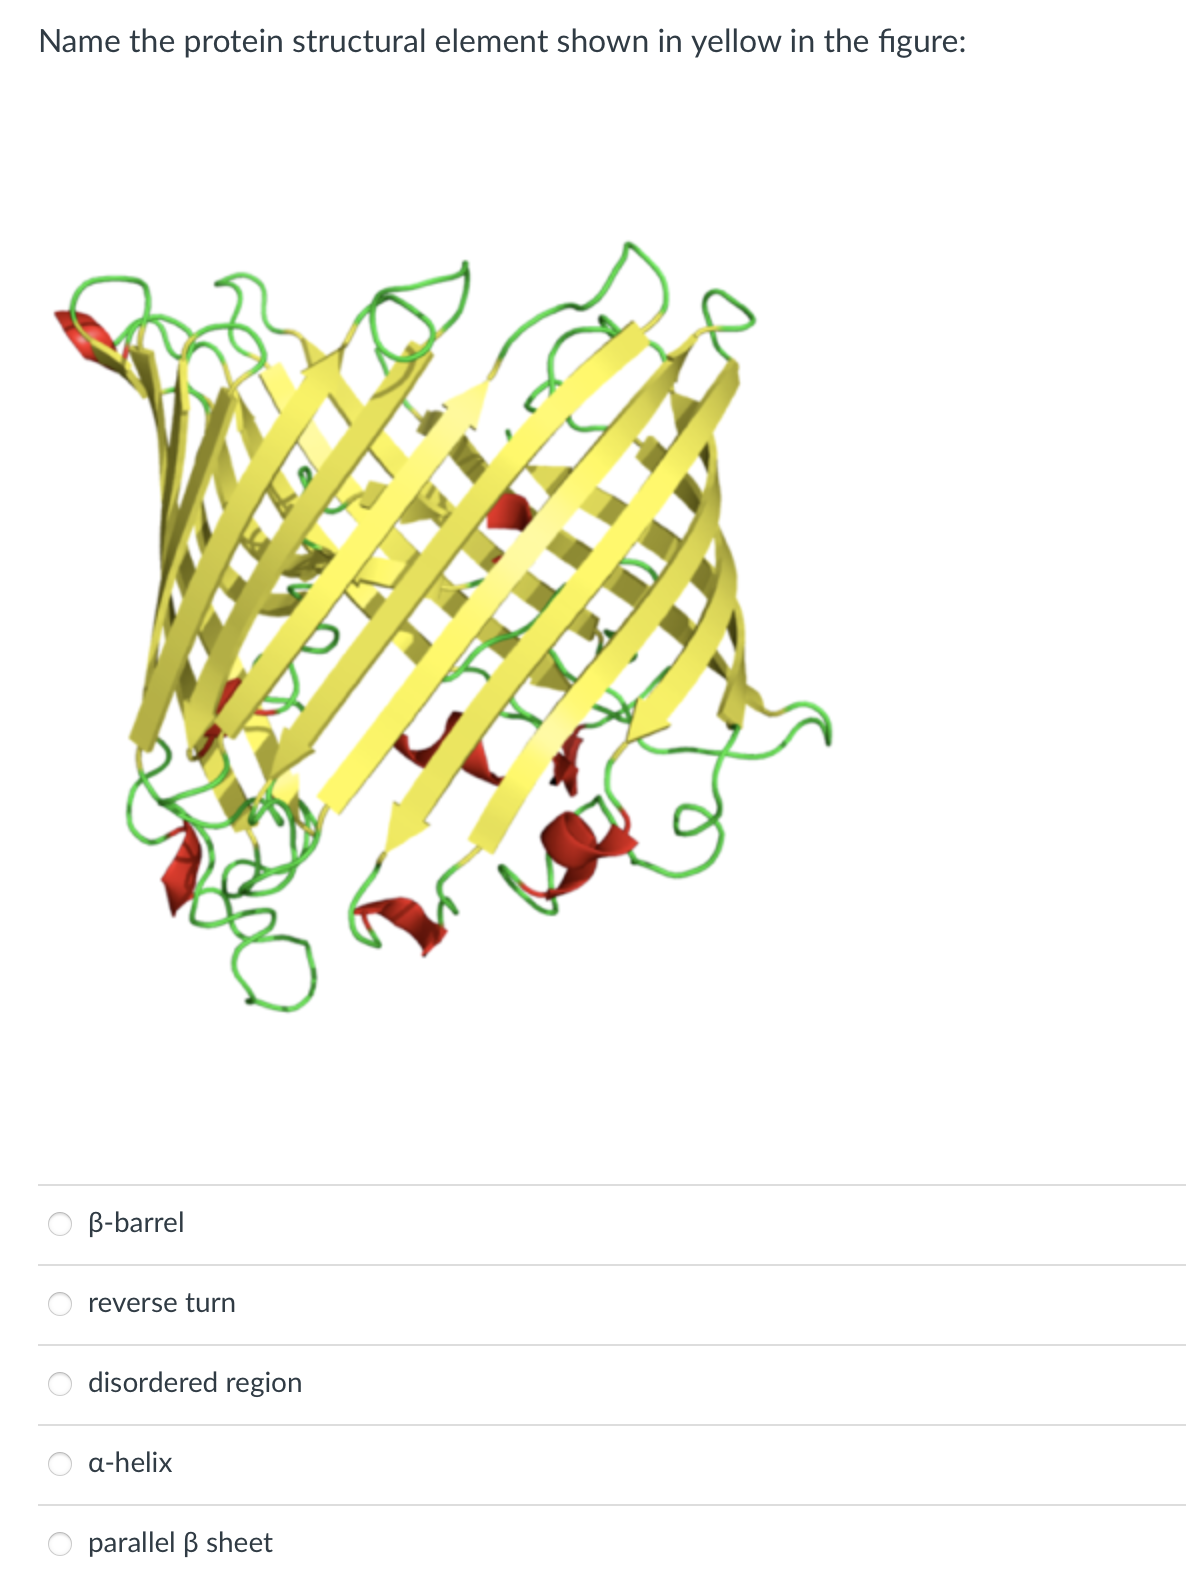 Name the protein structural element shown in yellow in the figure:
B-barrel
reverse turn
disordered region
a-helix
parallel ß sheet